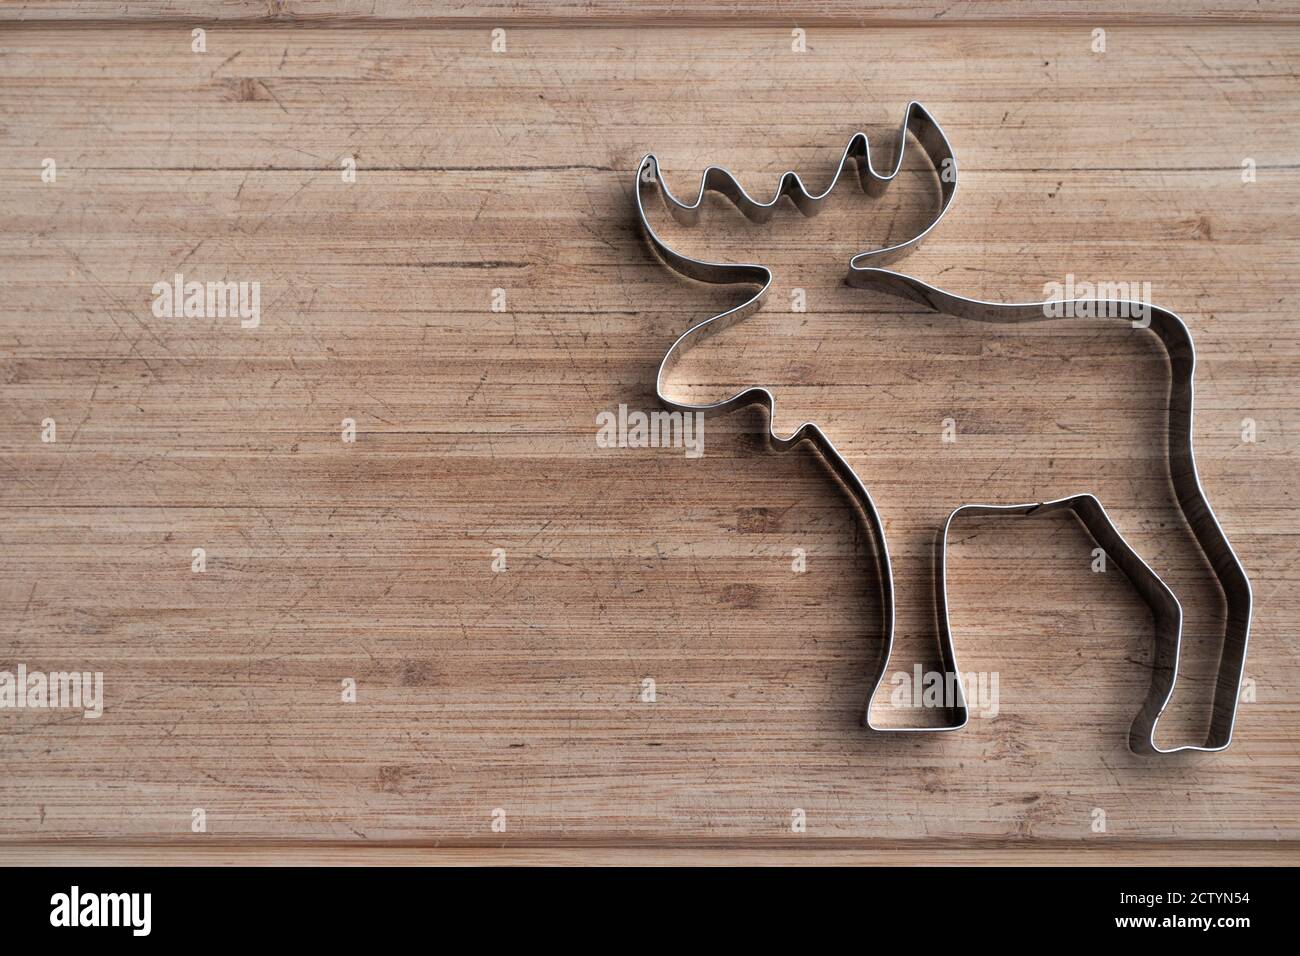 Stainless steel moose shape on wood board. Animal cookie cutter. Patriotic symbol of Canada. Silver silhouette. Copy space. Stock Photo